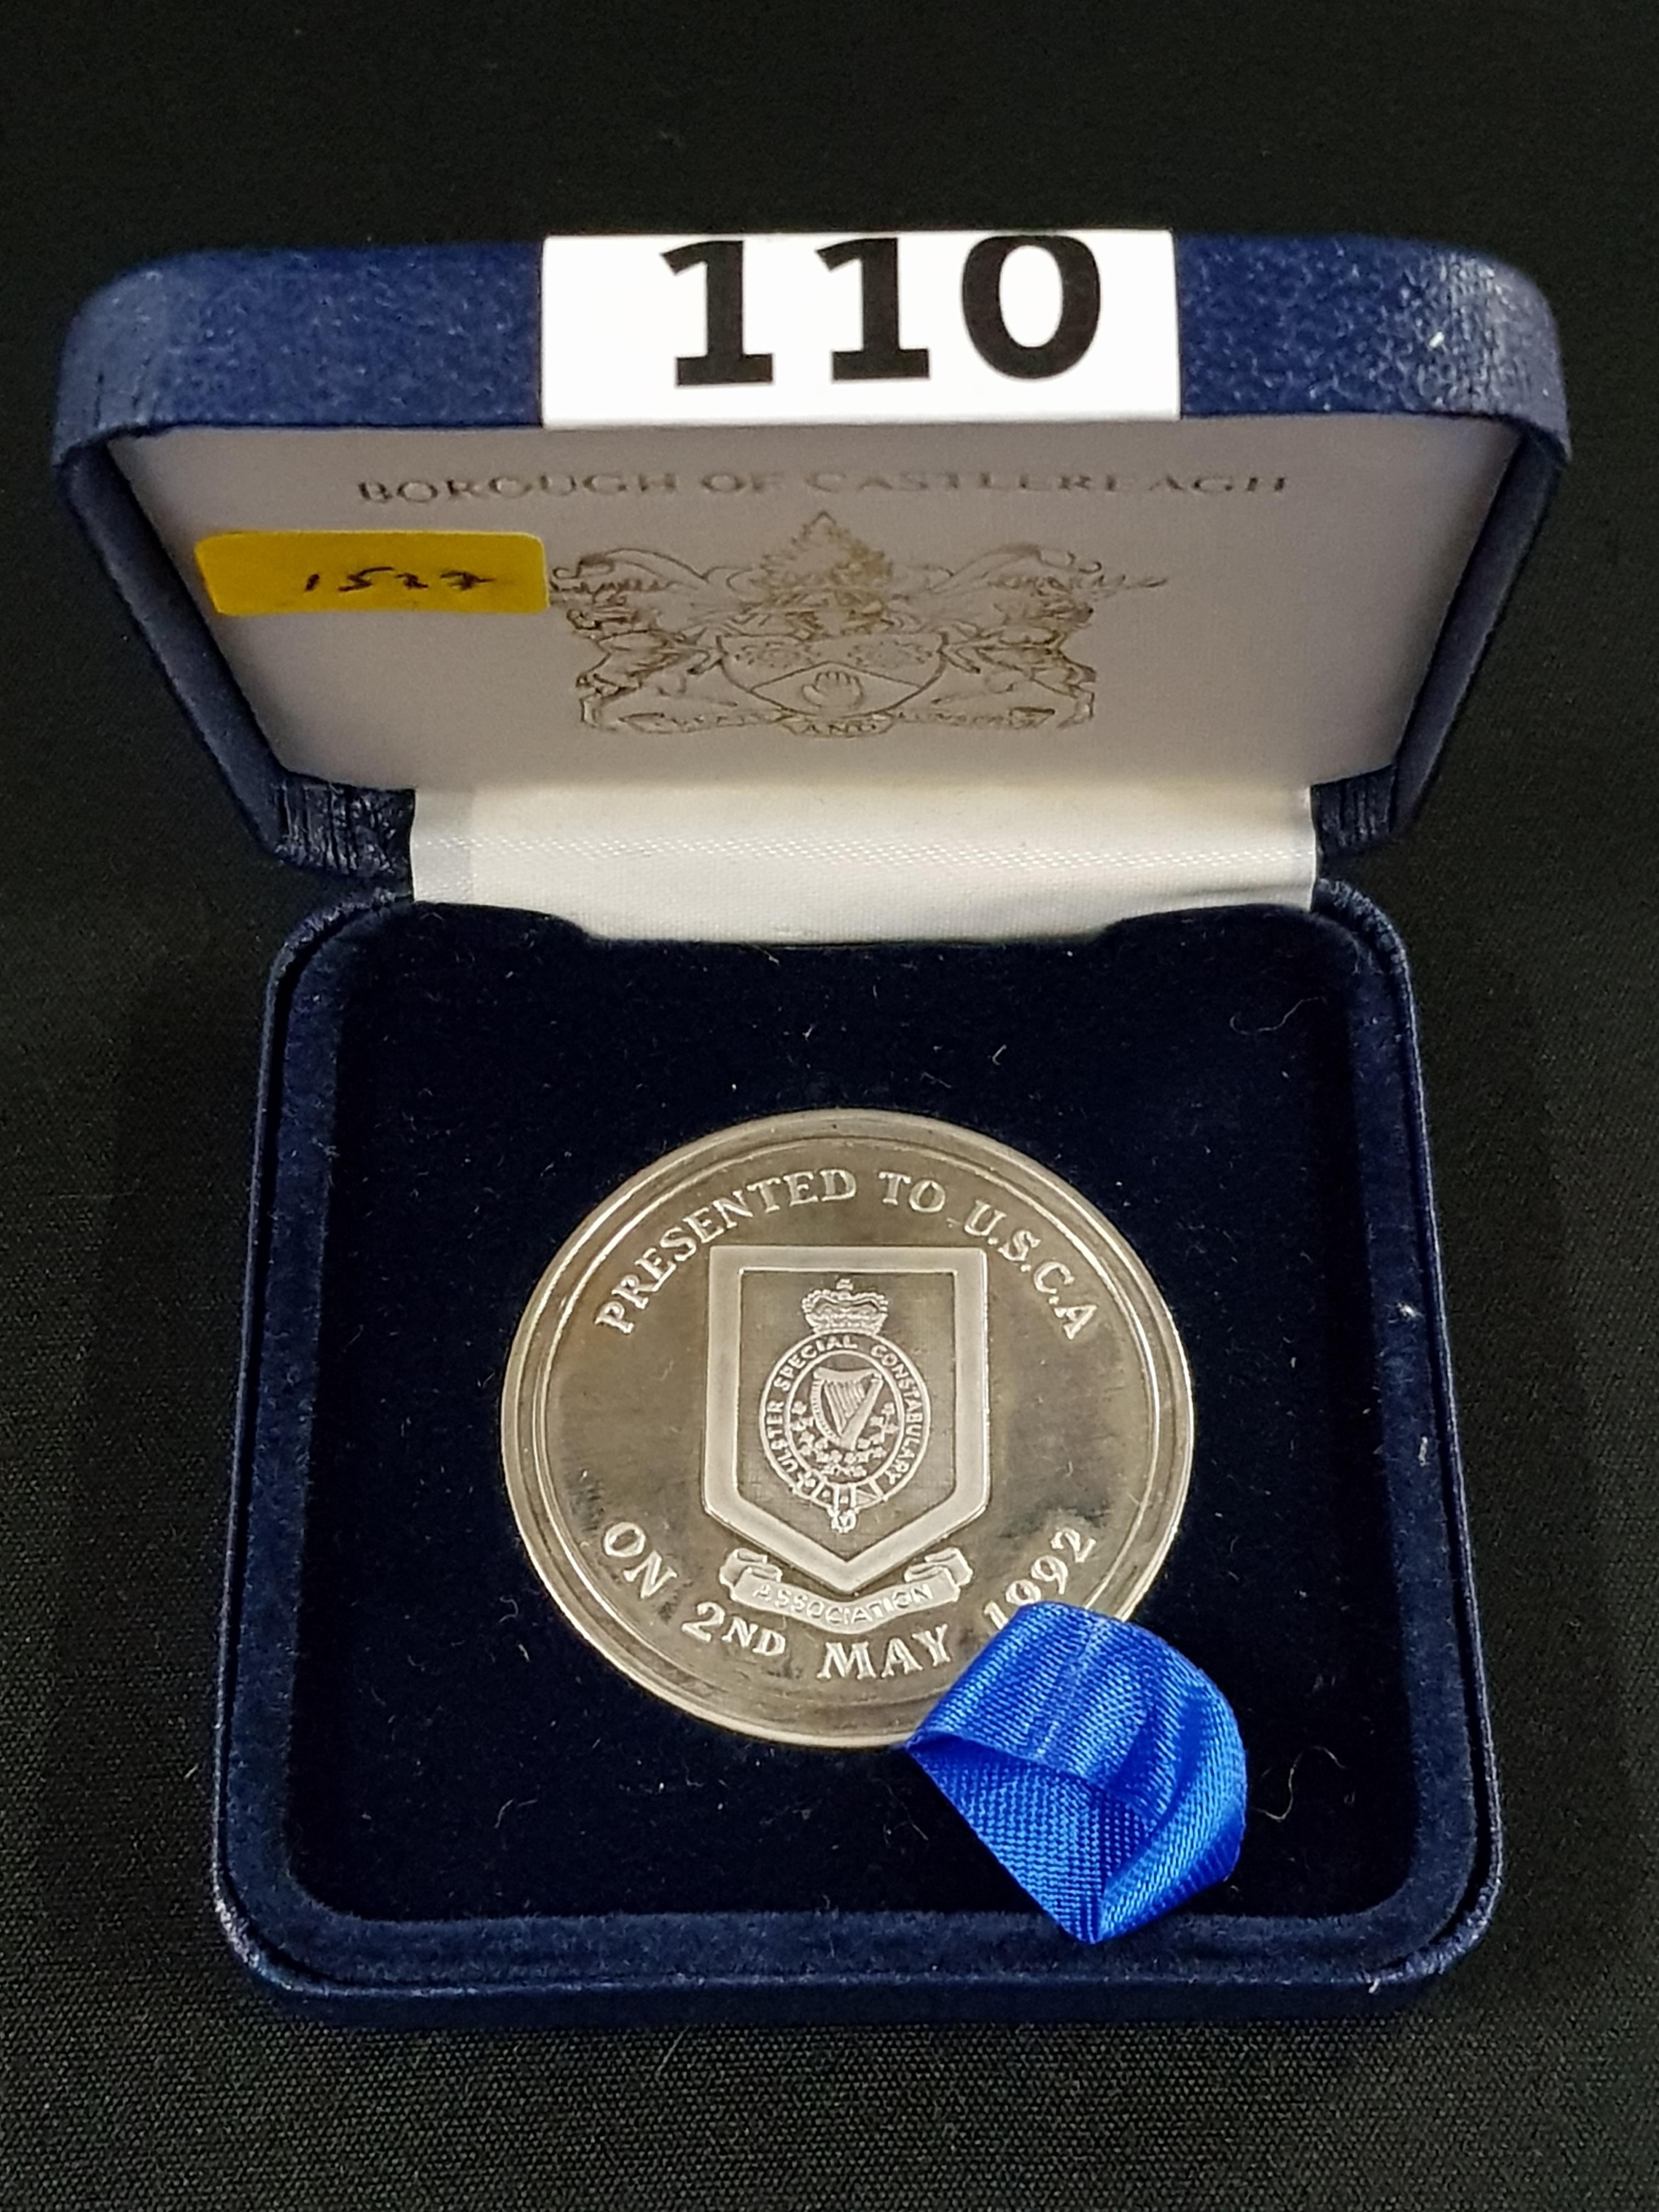 ULSTER SPECIAL CONSTABULARY FREEDOM OF BOROUGH OF CASTLEREAGH MEDALLION